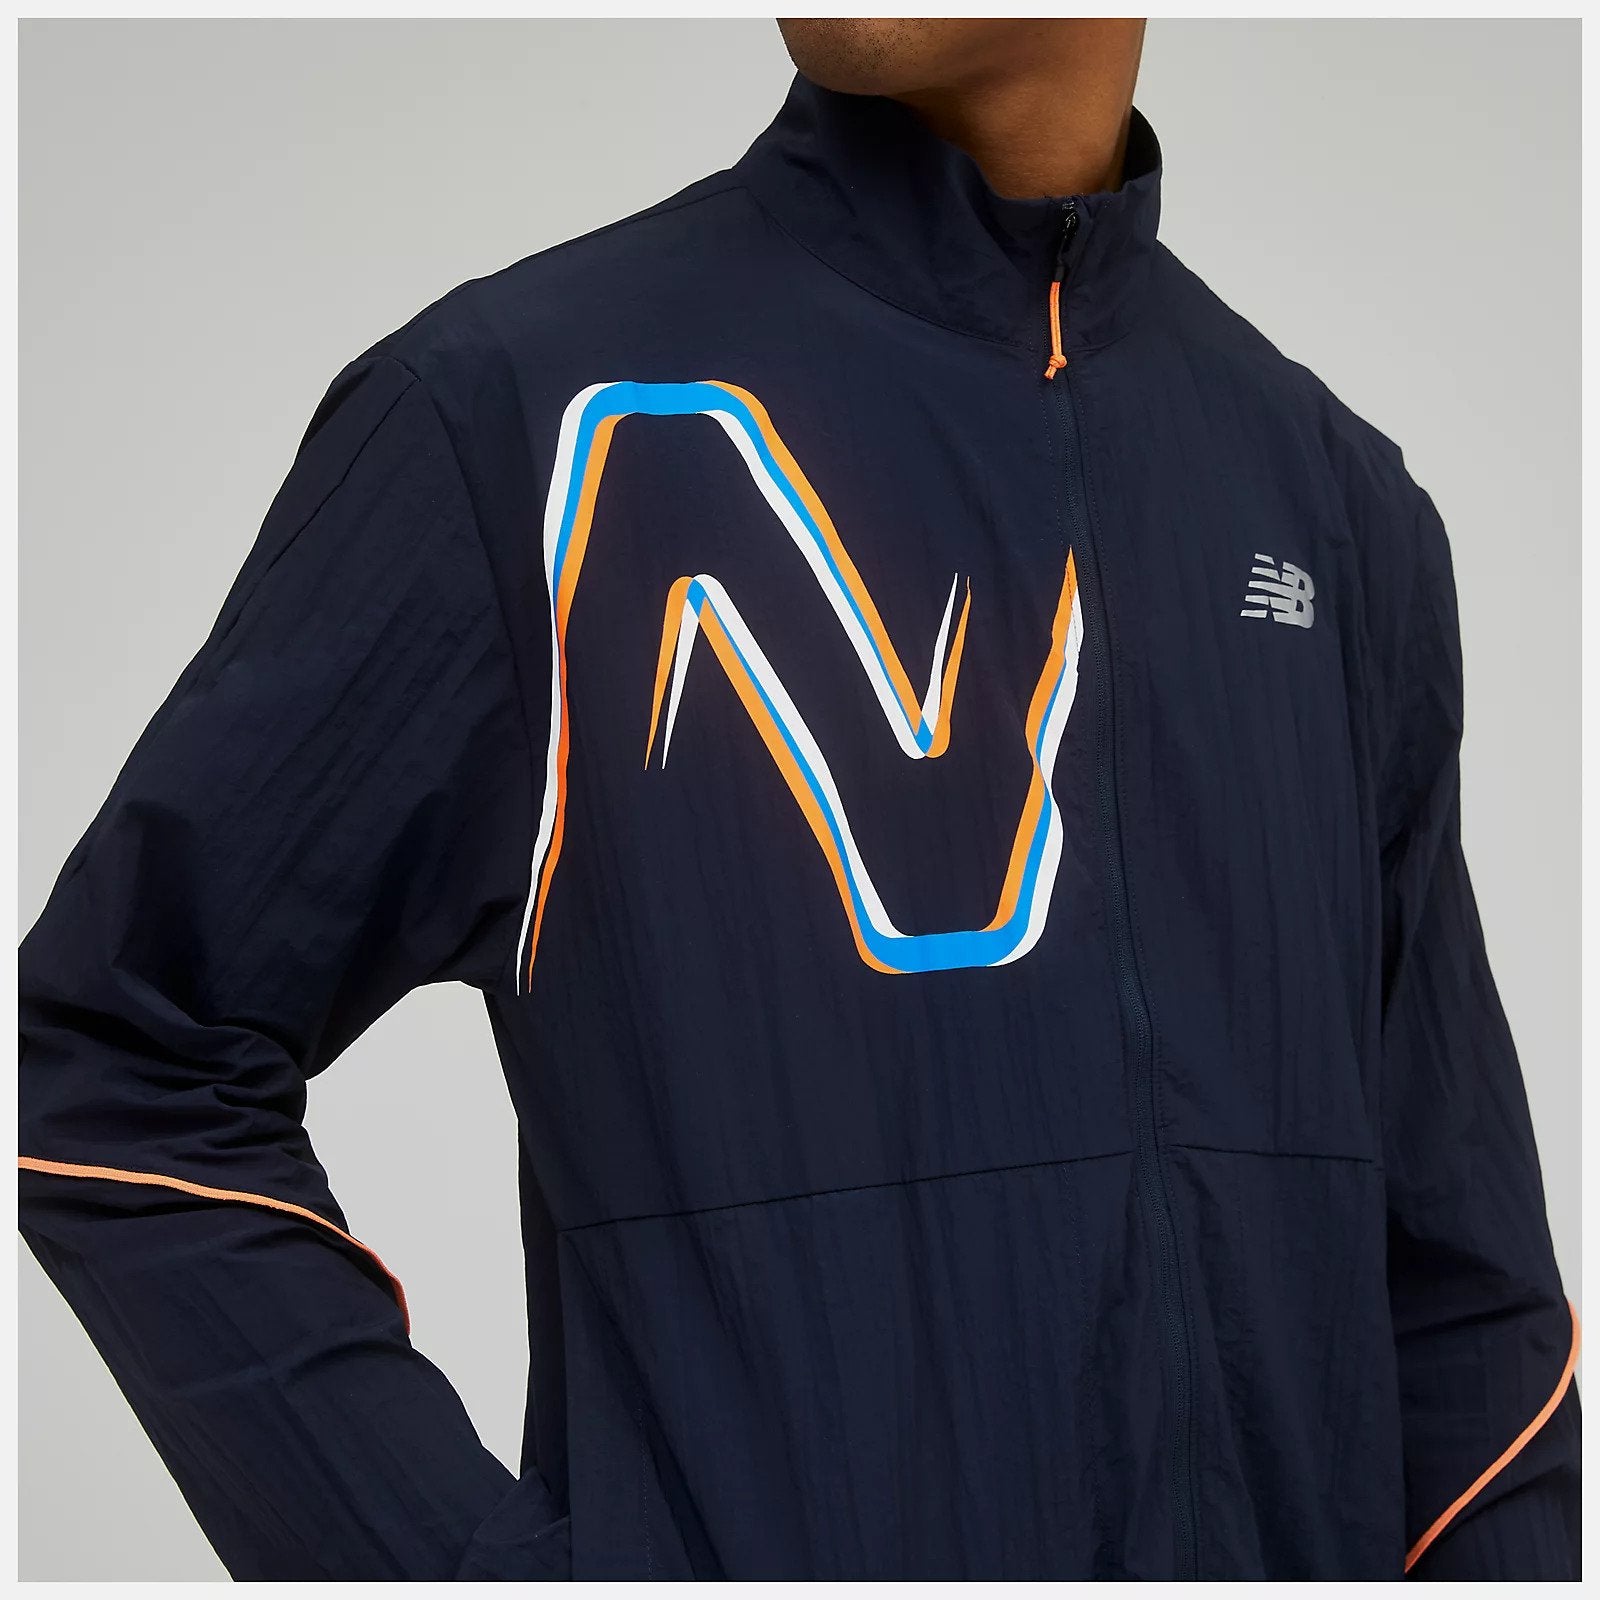 Front zoomed in view of a model wearing the Men's Graphic Impact Run Packable Jacket by New Balance in Eclipse